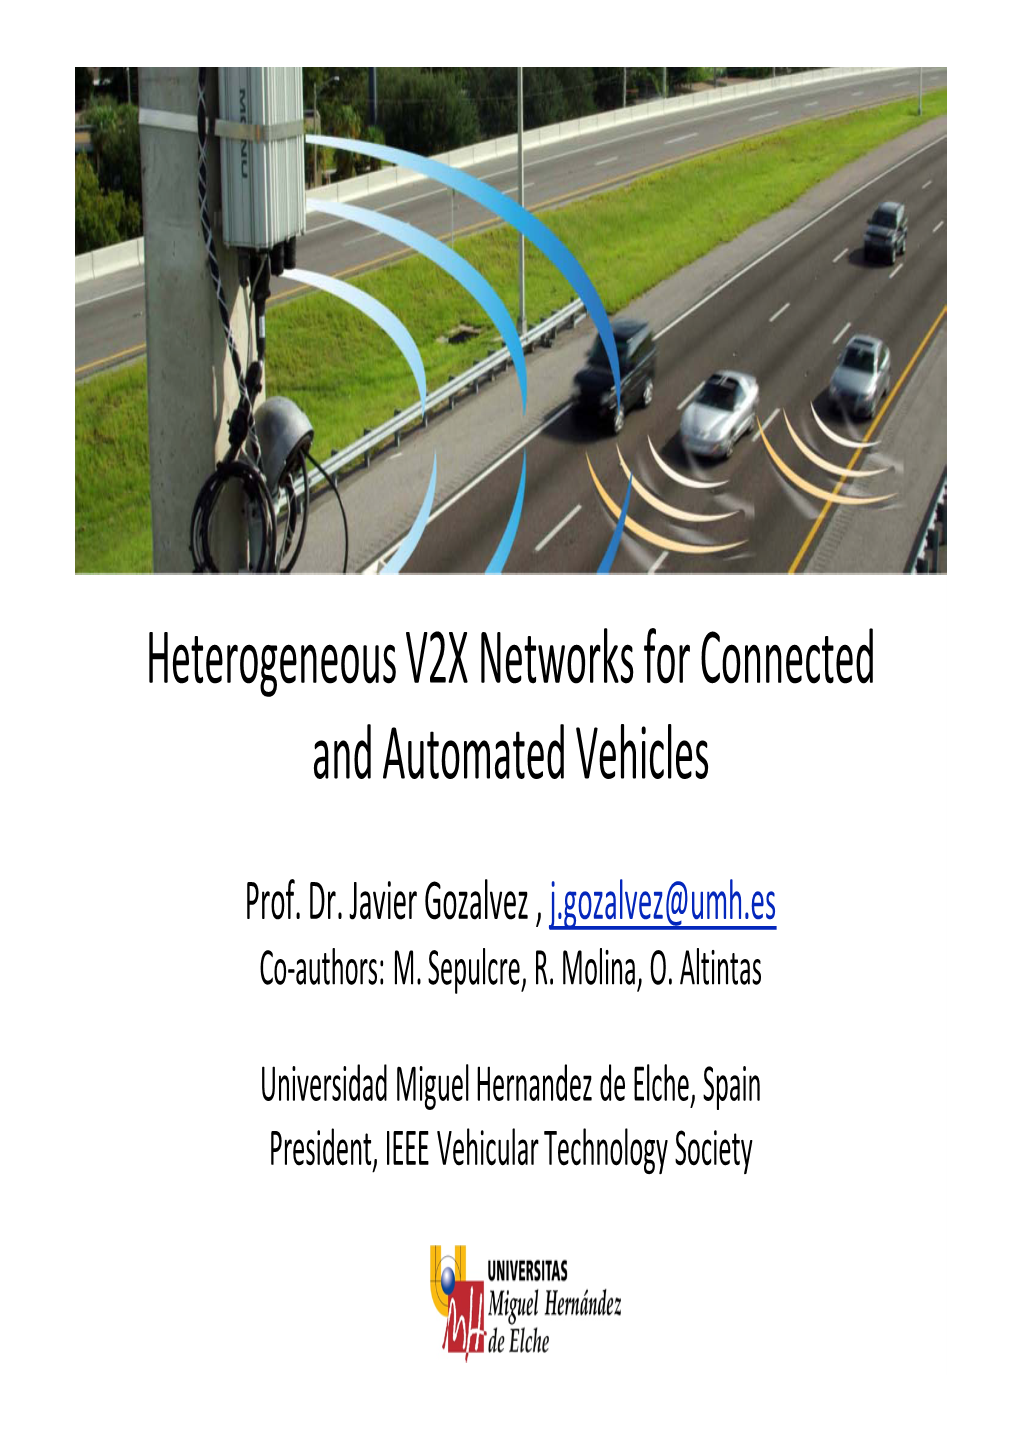 Heterogeneous V2X Networks for Connected and Automated Vehicles